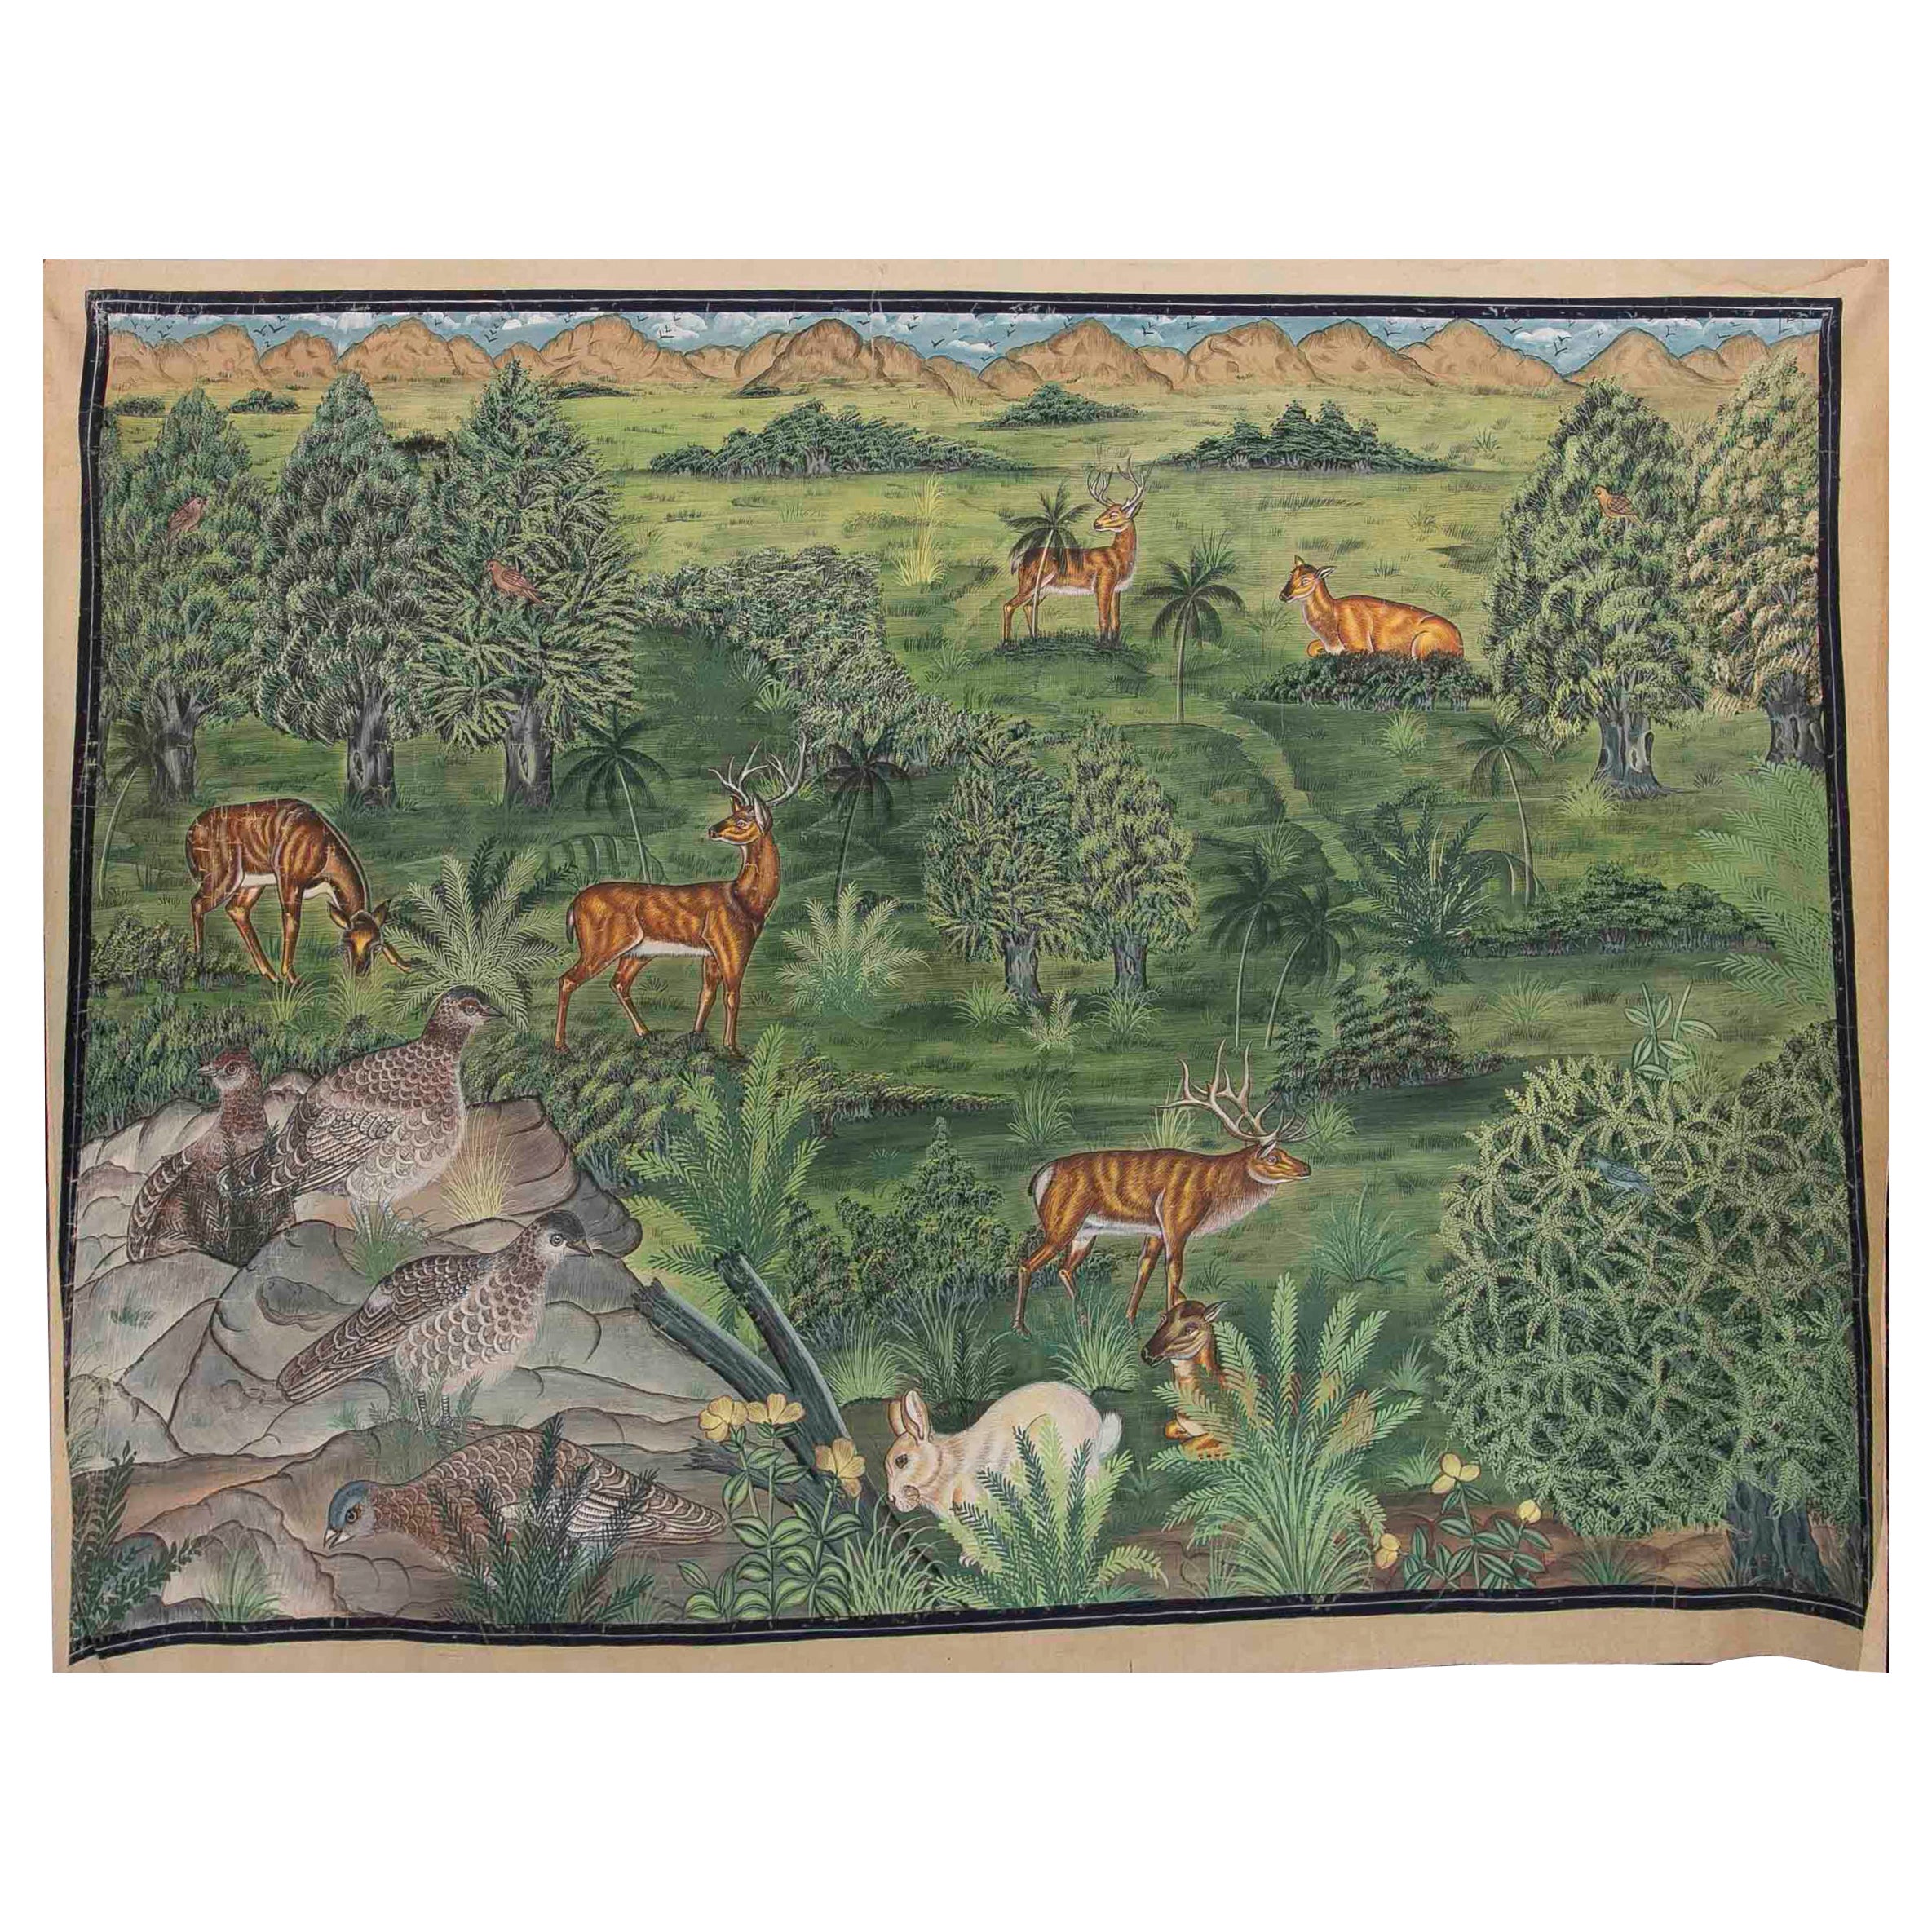 Painting on Canvas of a Landscape with Flowers and Animals Such as Deer